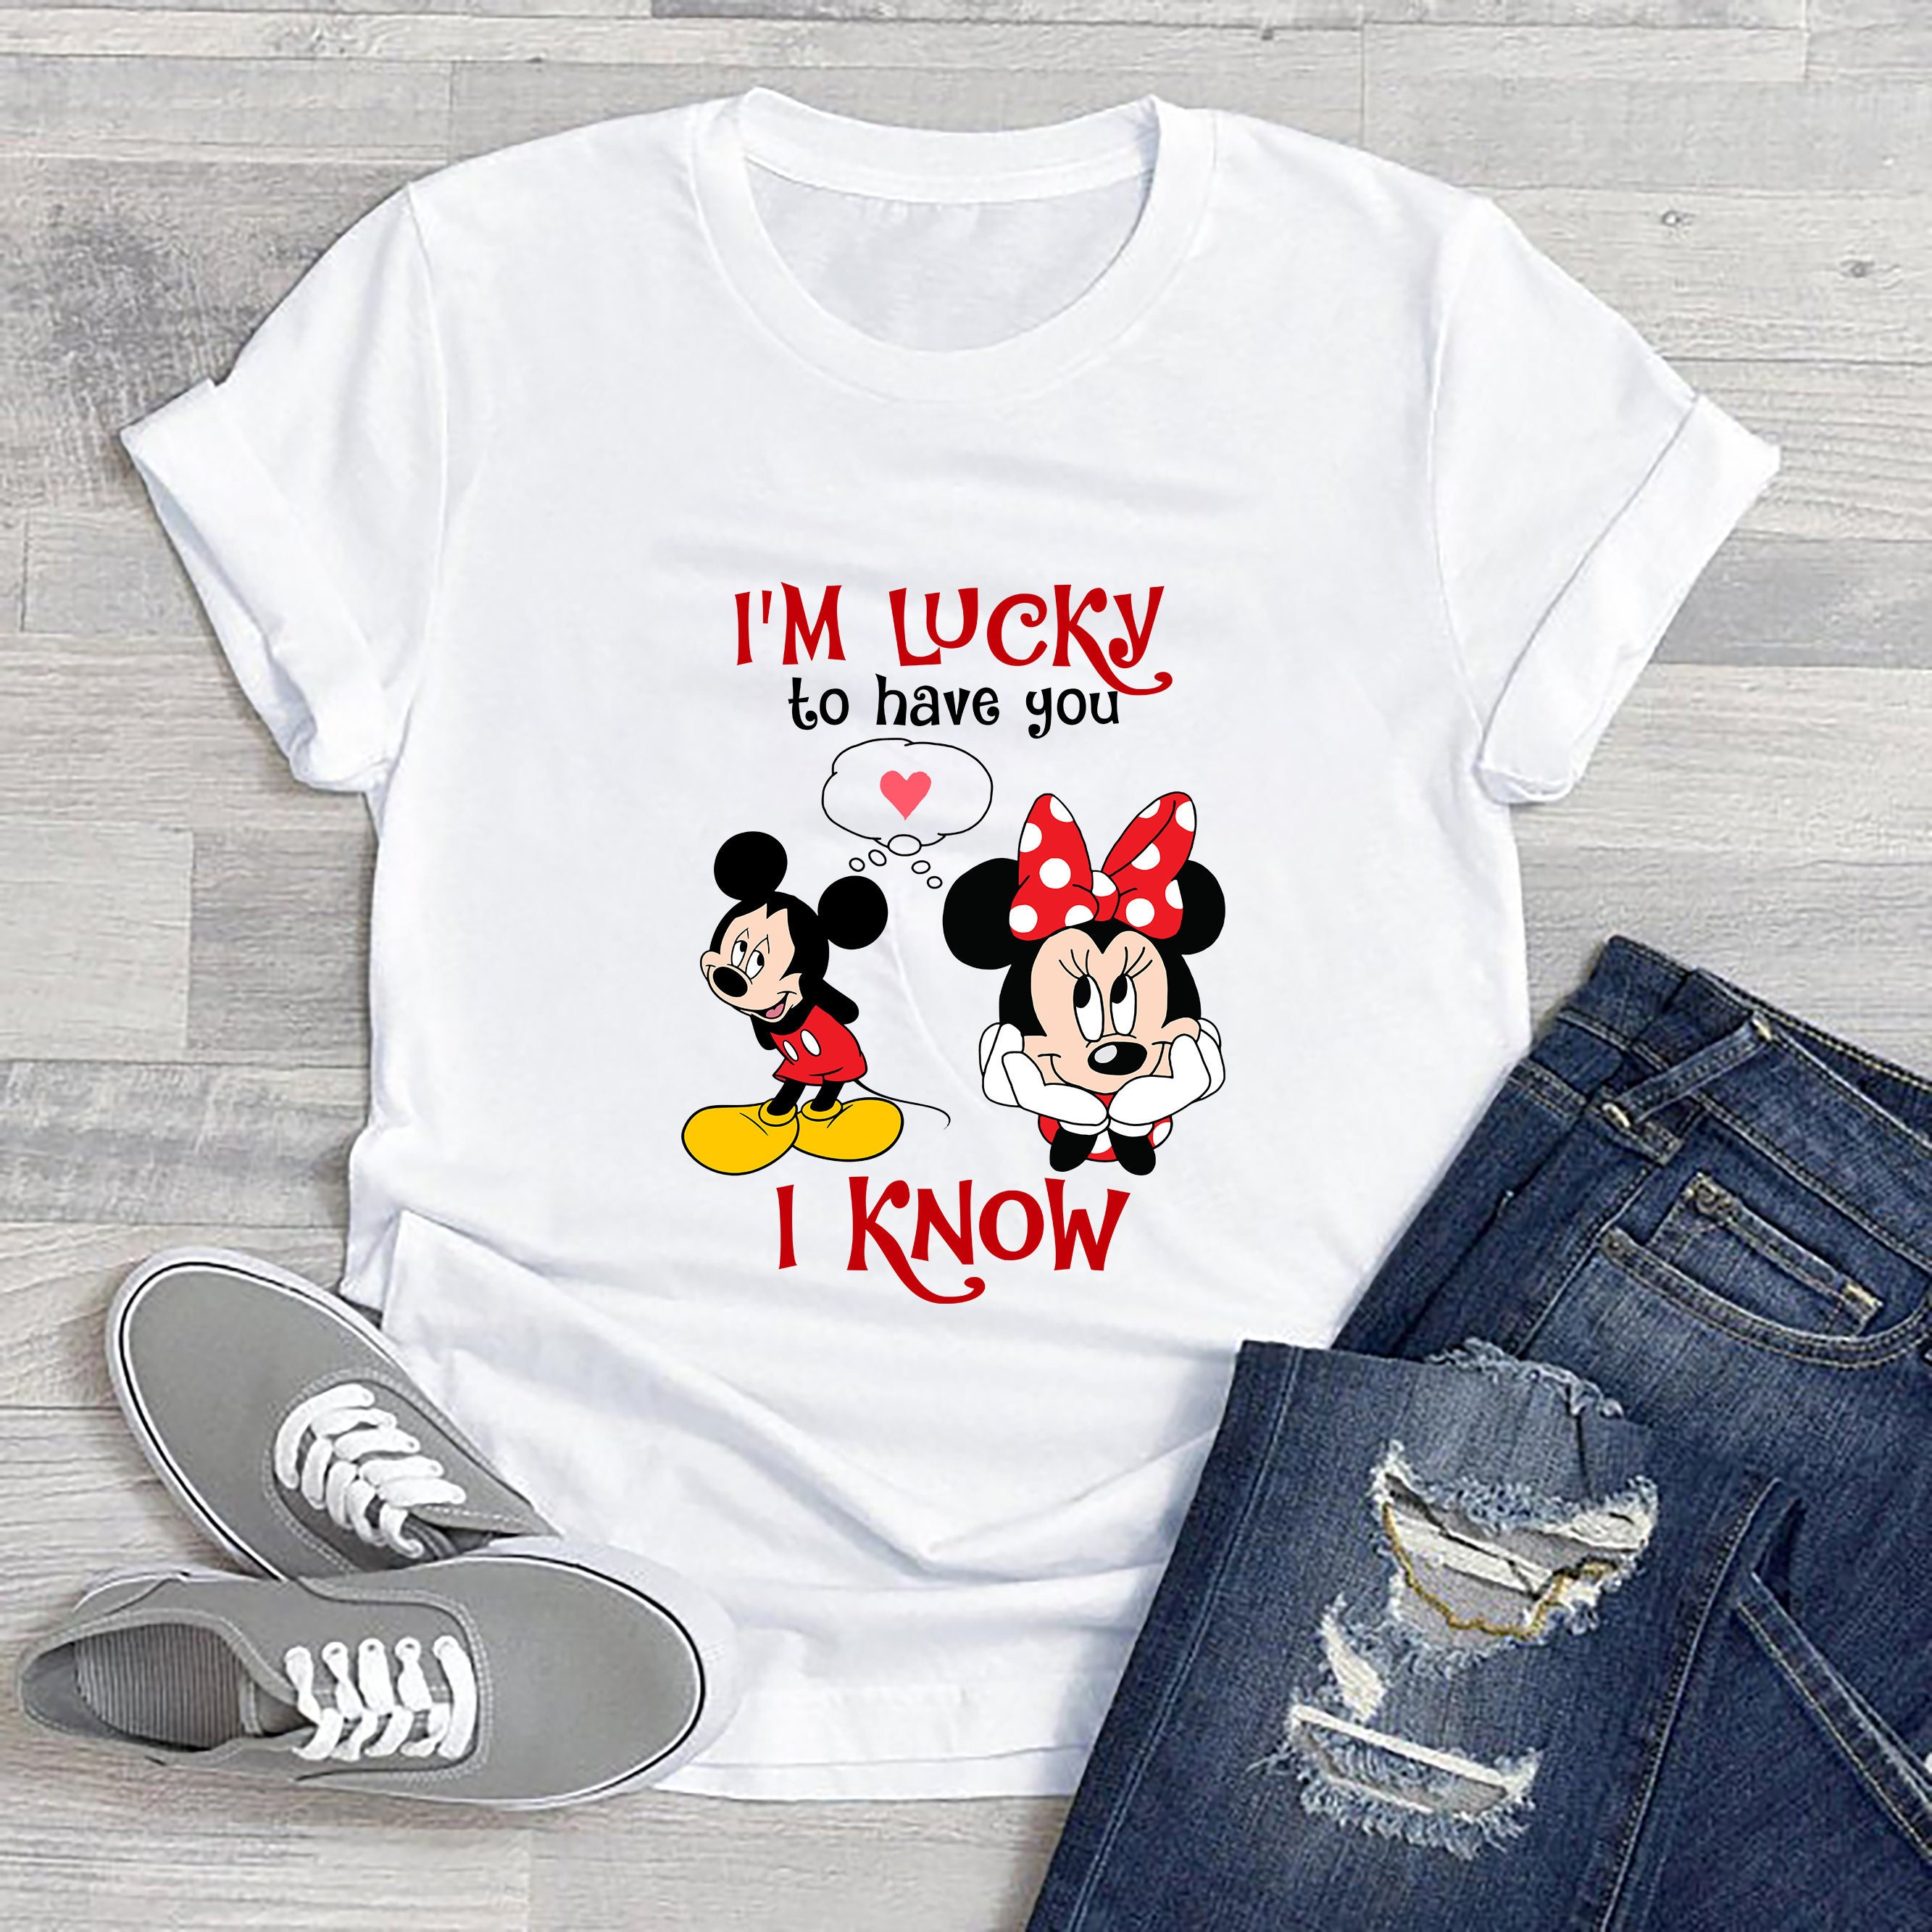 Disney Mickey and Minnie T-shirt I Am Lucky to Have You - Etsy